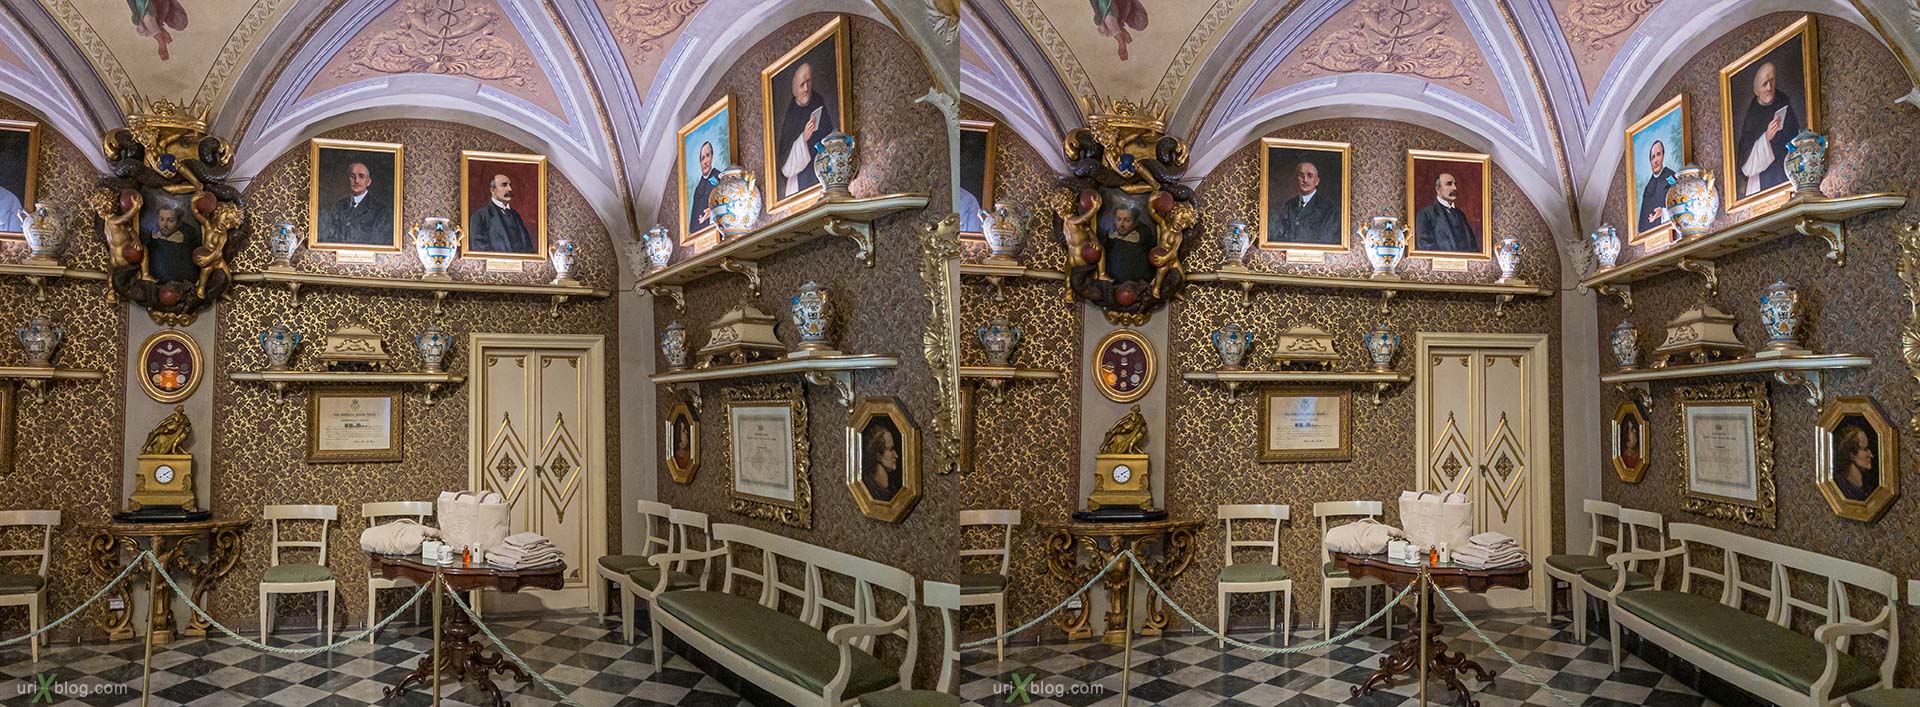 Santa Maria Novella, pharmacy, Florence, Firenze, Italy, 3D, stereo pair, cross-eyed, crossview, cross view stereo pair, stereoscopic